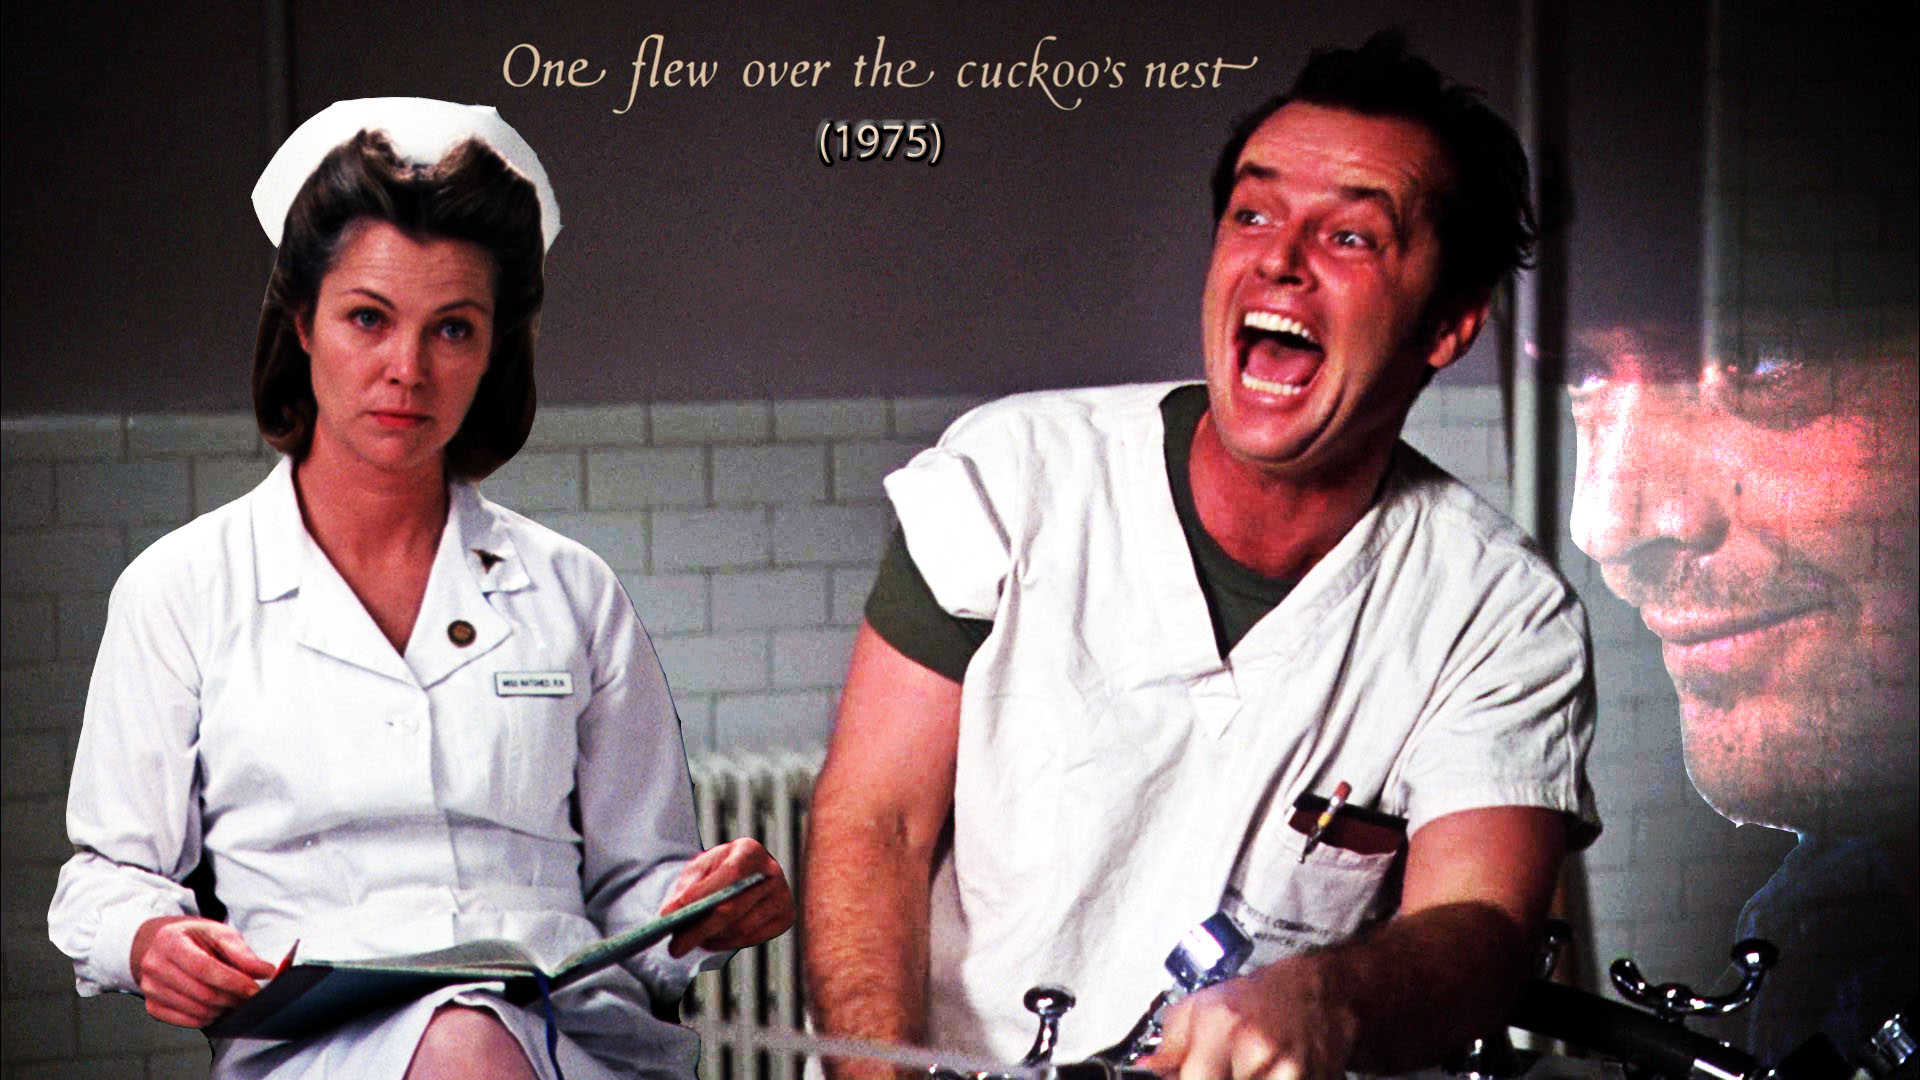 One Flew Over the Cuckoo's Nest 1975 - Classic Movies Wallpaper